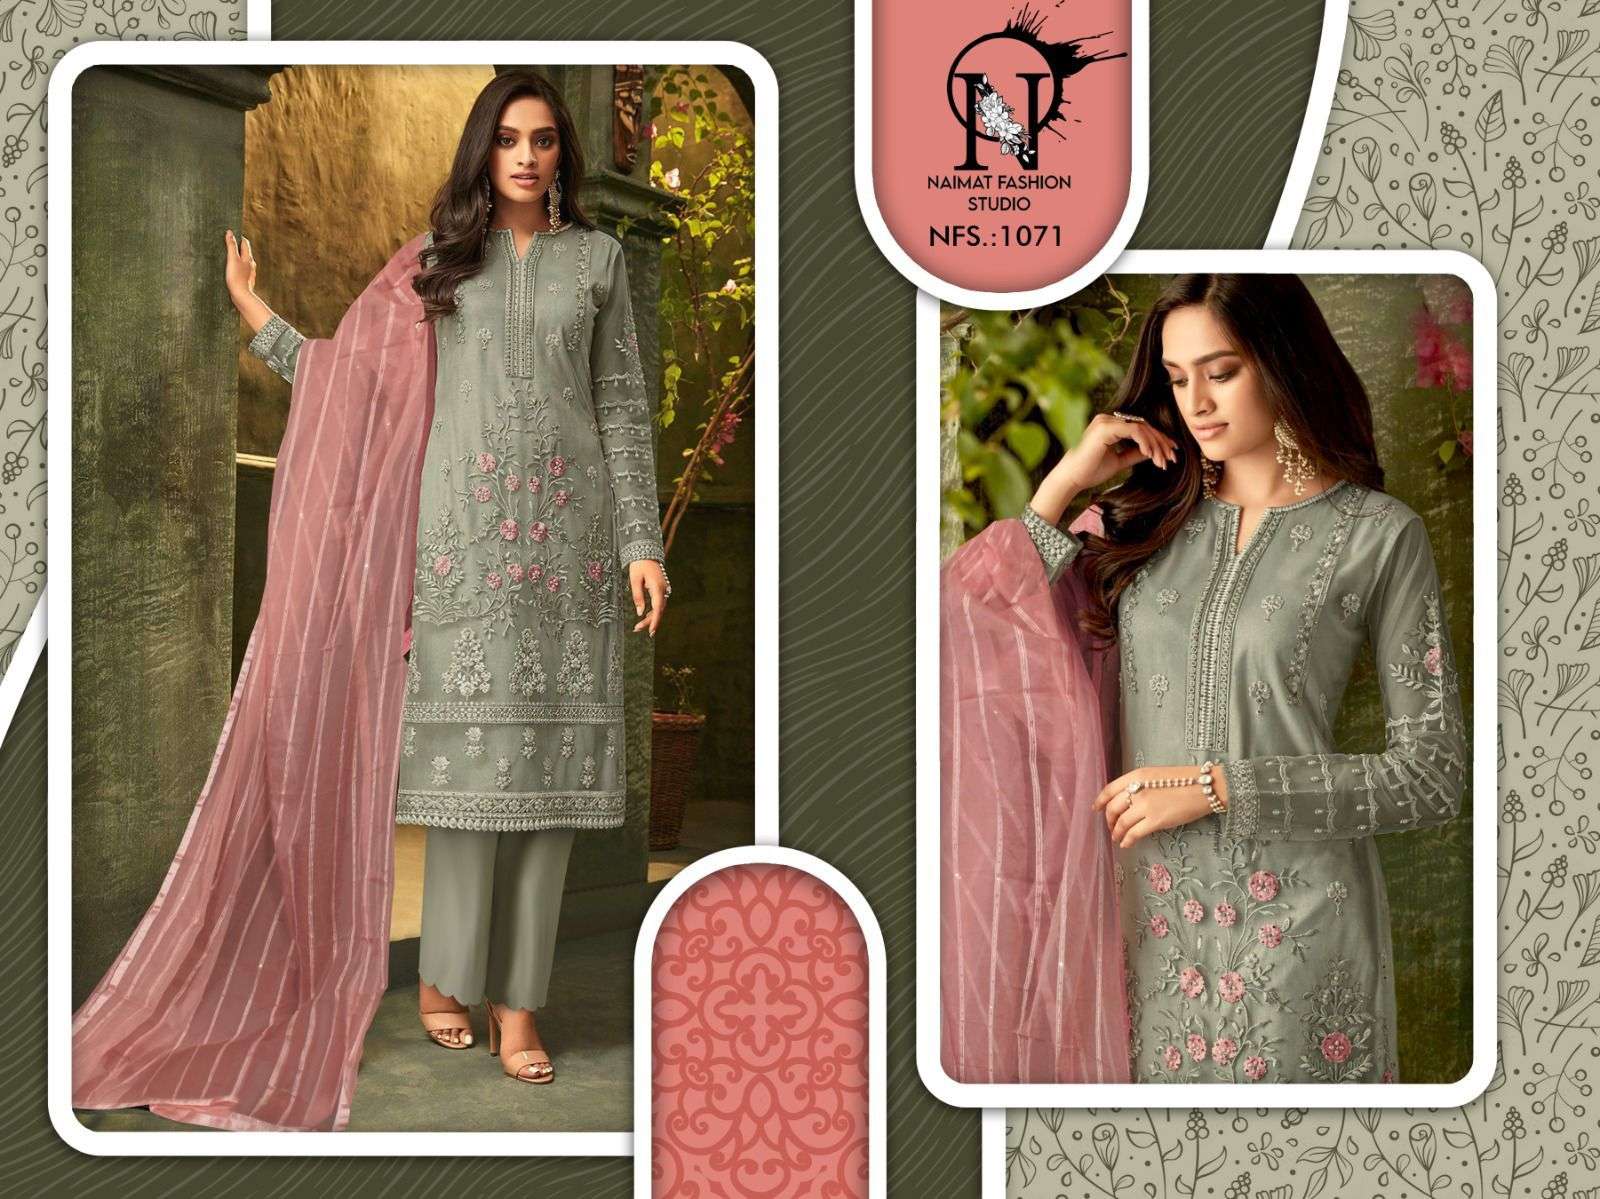 Naimat Hit Design 1071 By Naimat Fashion Studio Beautiful Stylish Pakistani Suits Fancy Colorful Casual Wear & Ethnic Wear & Ready To Wear Pure Faux Georgette Embroidery Dresses At Wholesale Price